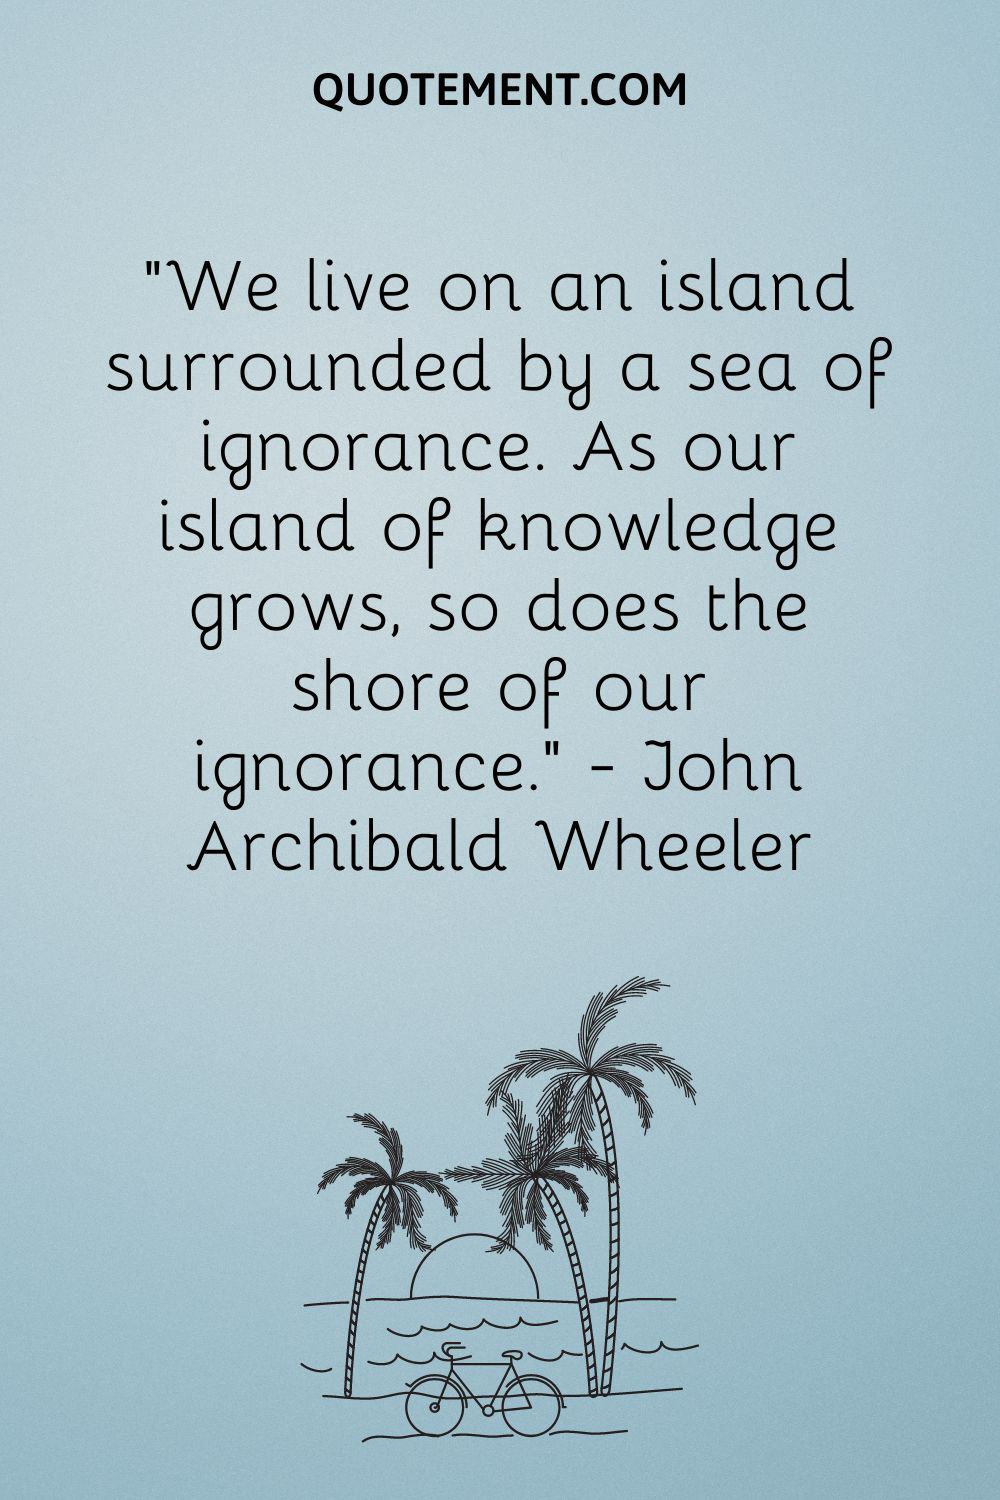 We live on an island surrounded by a sea of ignorance. As our island of knowledge grows, so does the shore of our ignorance. — John Archibald Wheeler